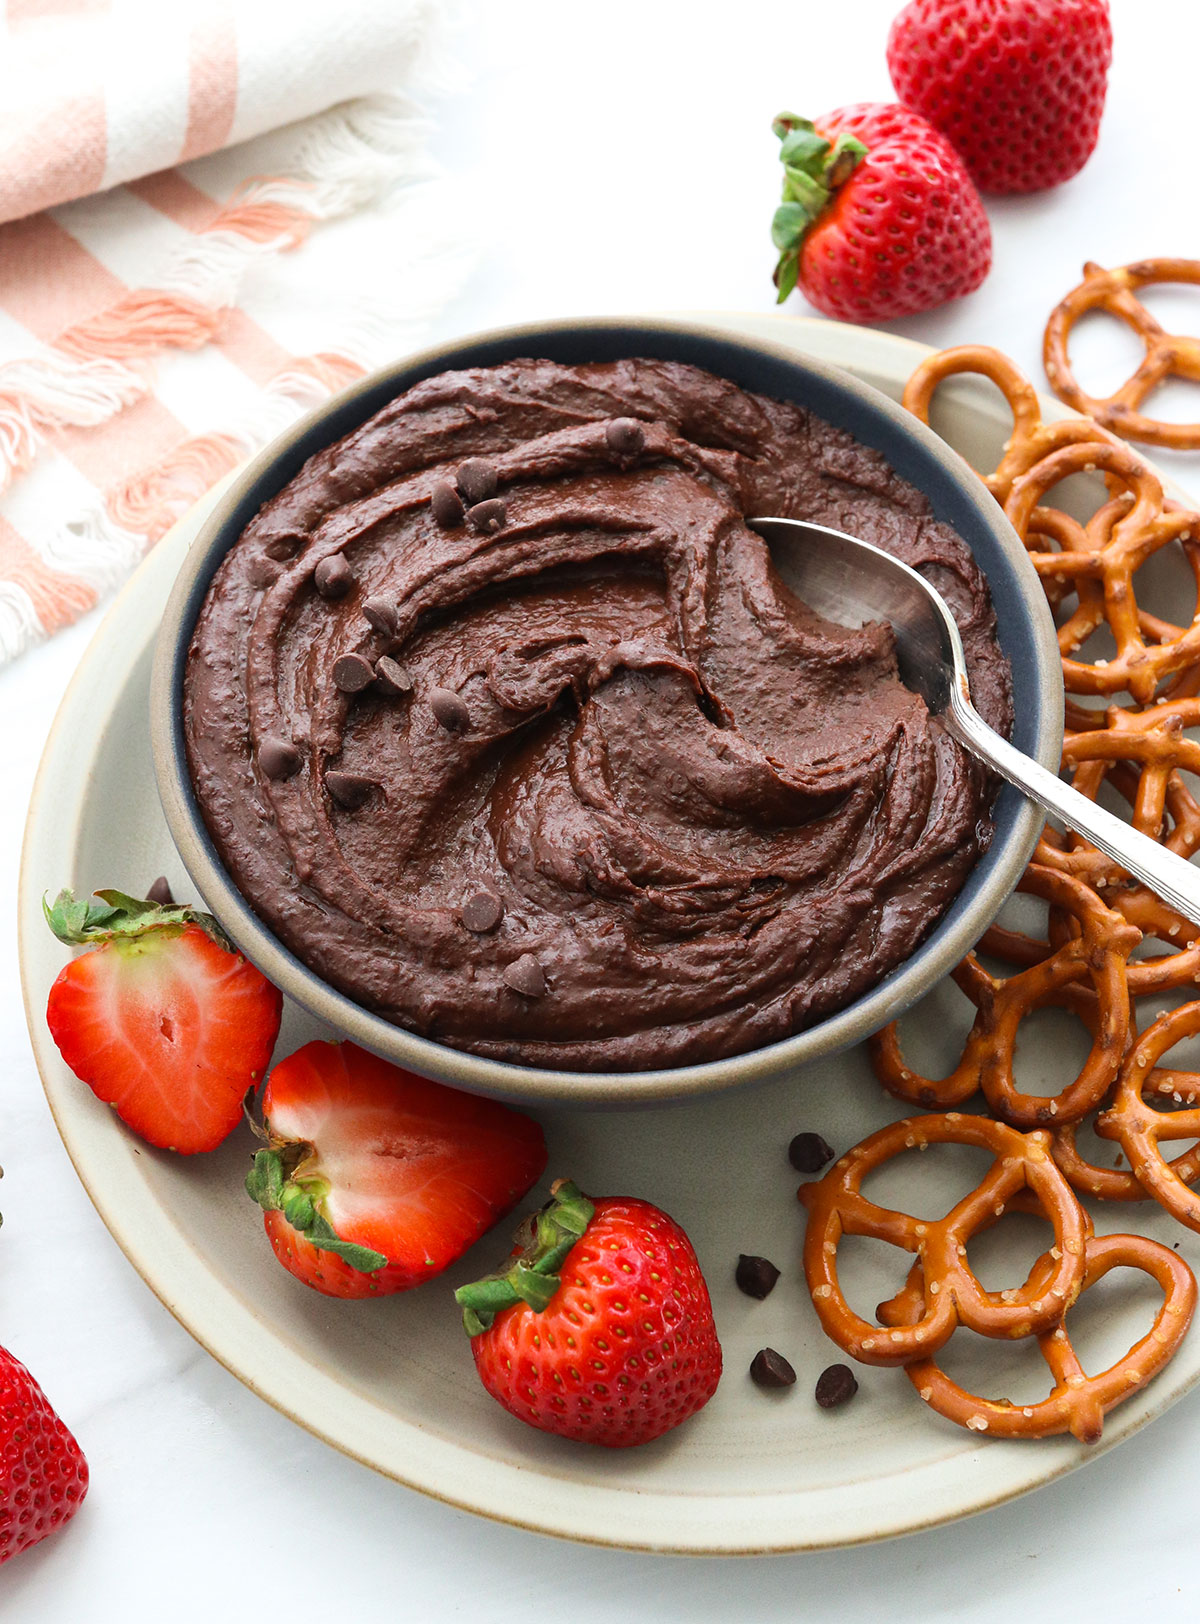 chocolate hummus served with a spoon.